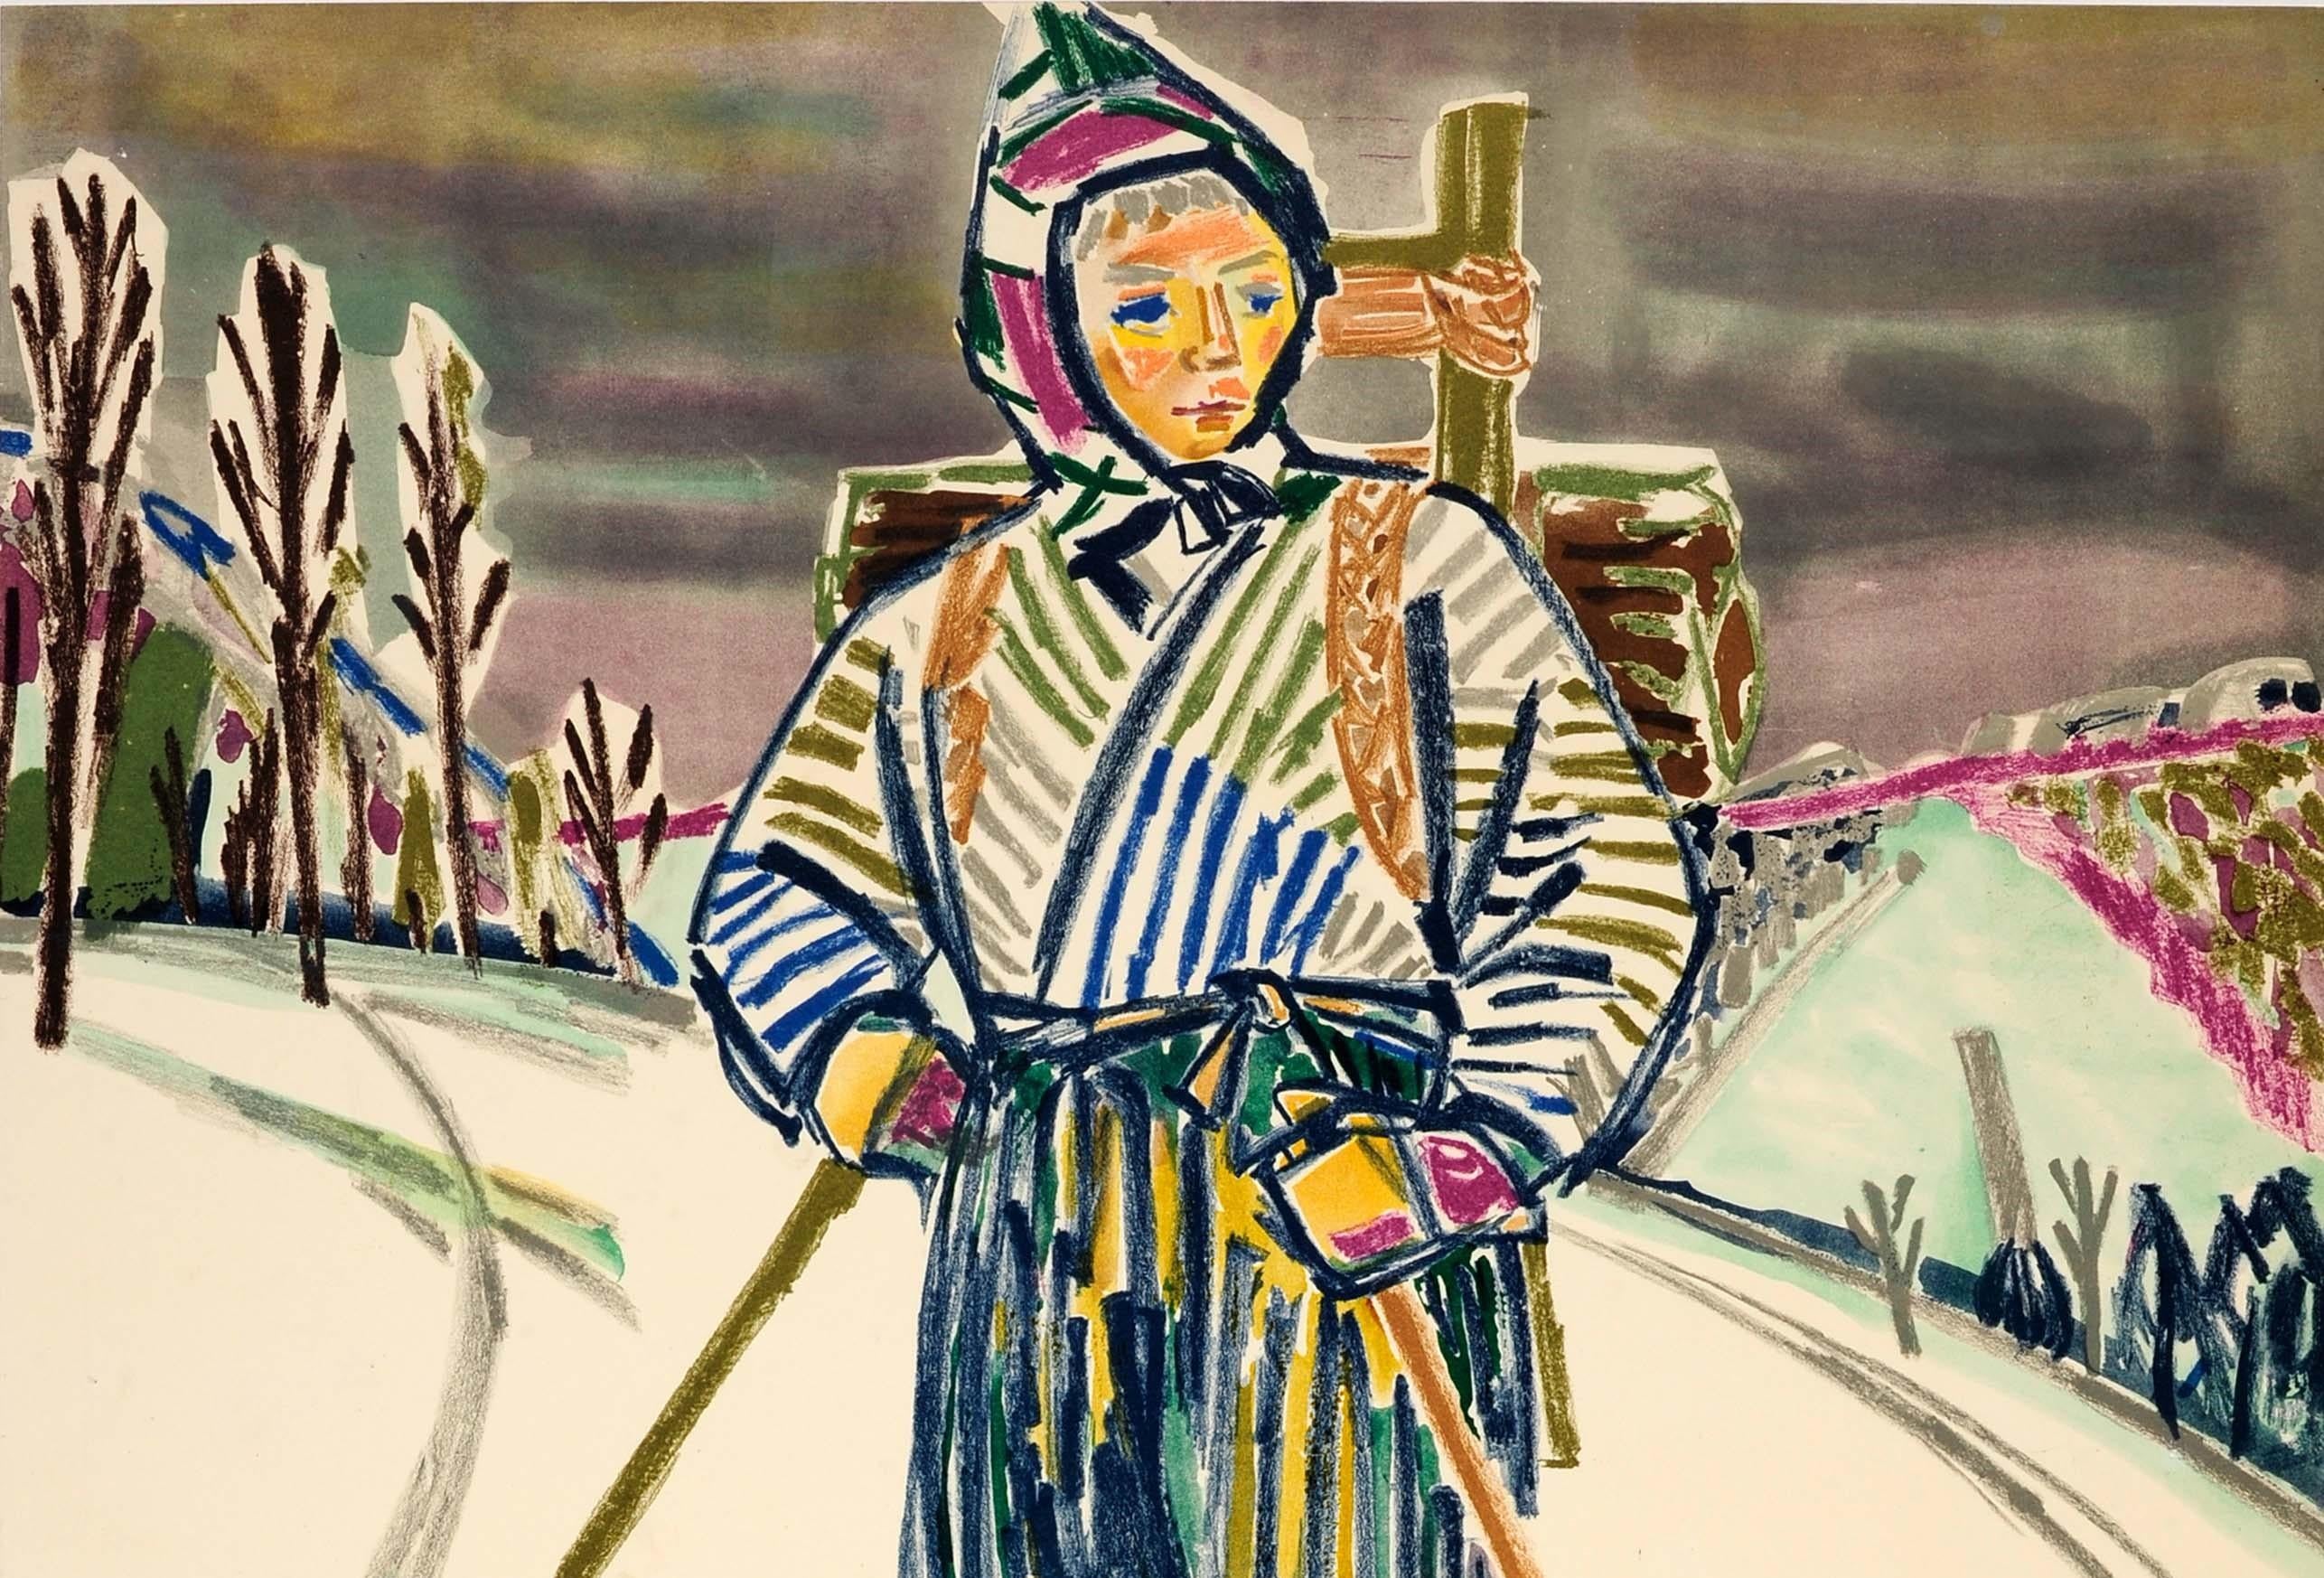 Original vintage Japanese travel poster for Nozawa Onsen featuring a great illustration of a cross country skier dressed in traditional warm clothing, carrying a backpack and holding bamboo ski poles with the trees lining the snowy landscape in the